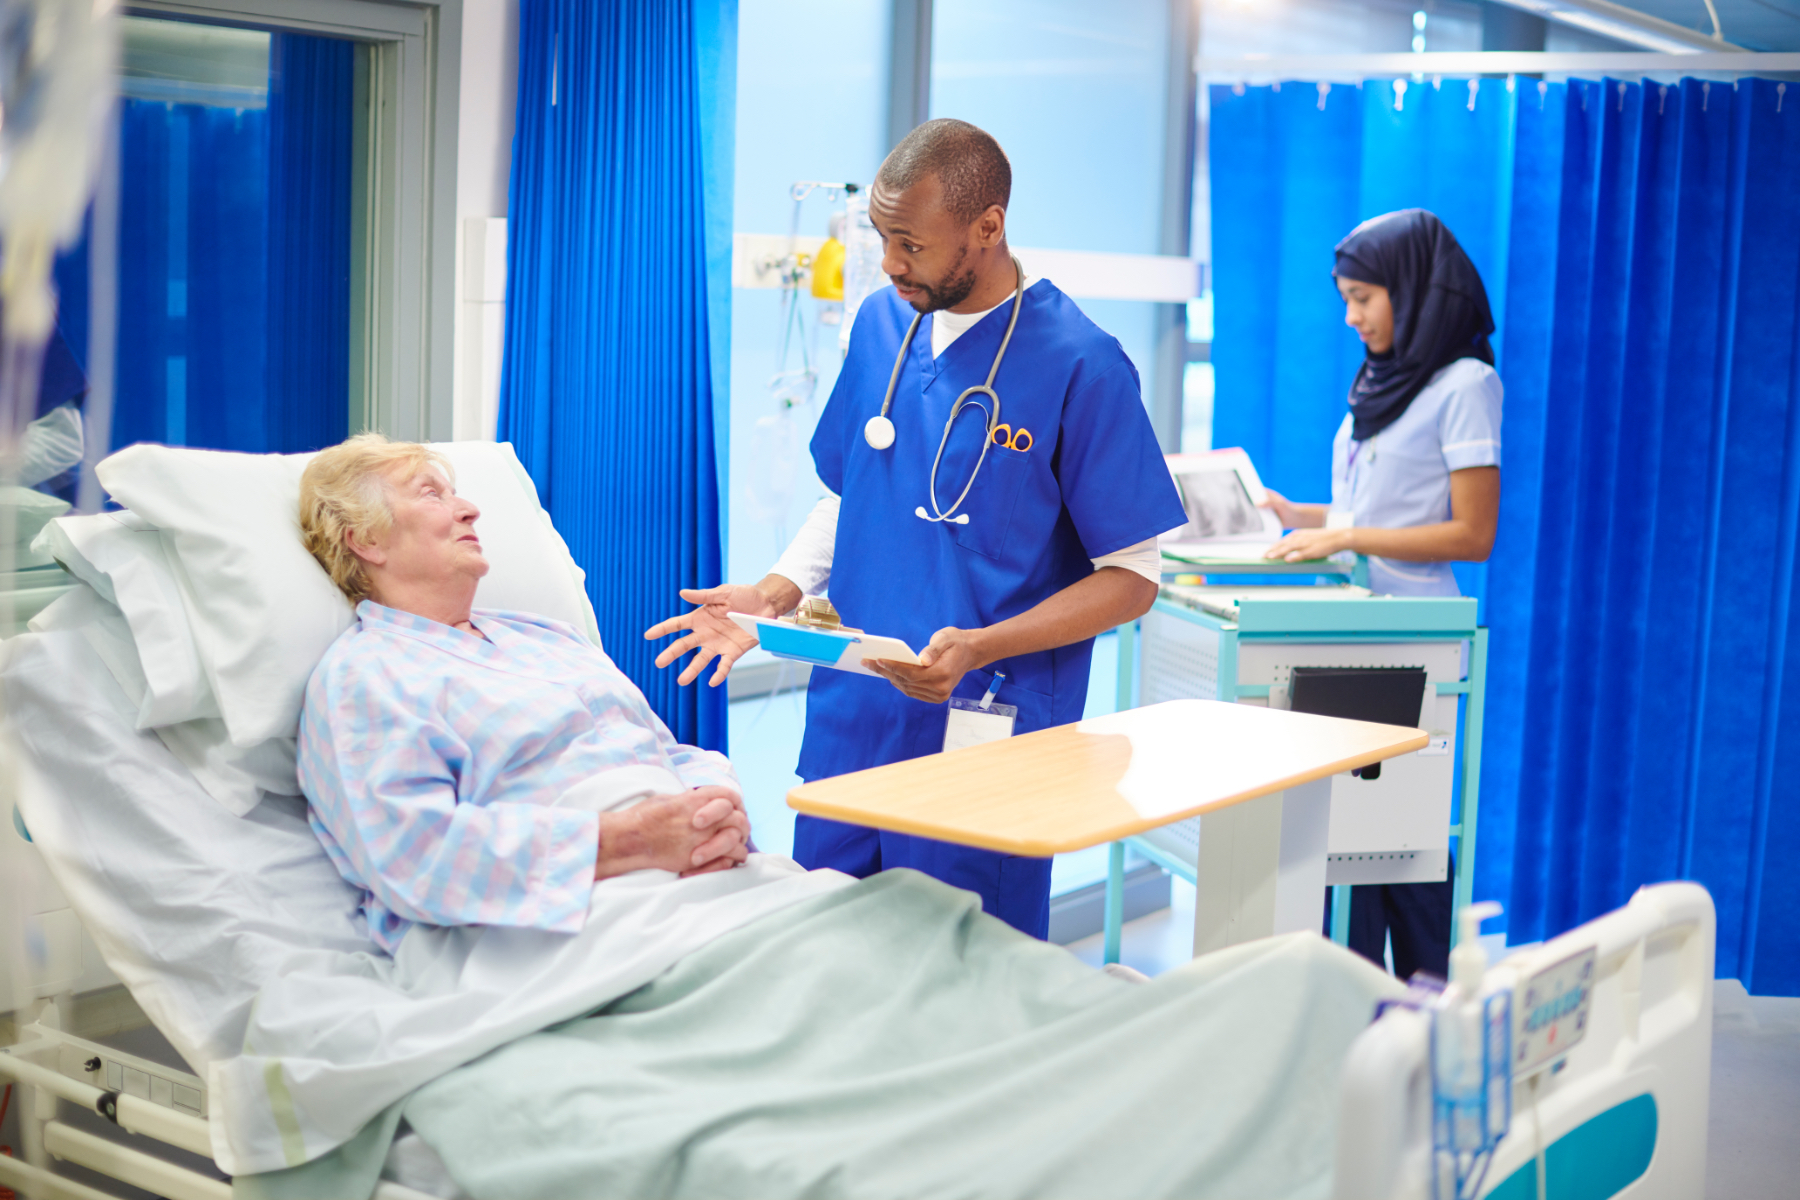 Image of a nurse speaking to a patient lying in a bed